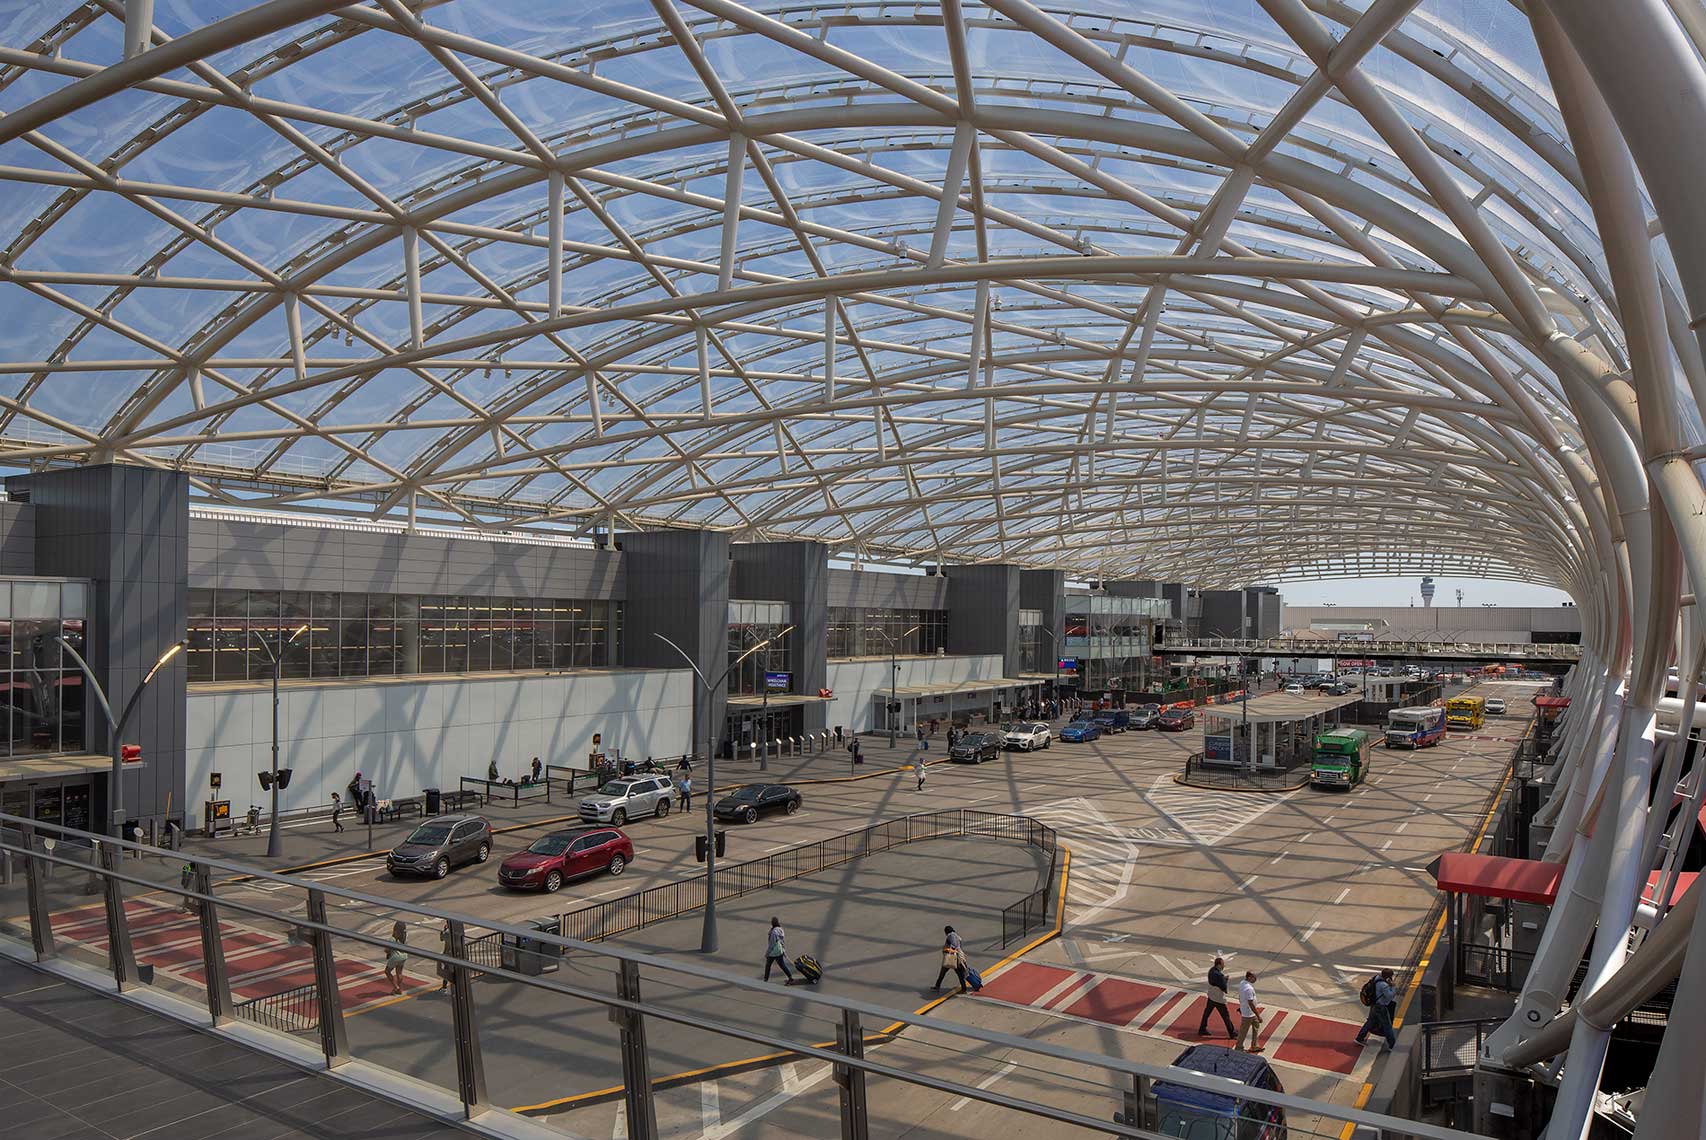 Hartsfield Jackson Atlanta International Airport | South Terminal Canopy from Pedestrian Bridge<br>New South-McCarthy-Synergy Joint Venture